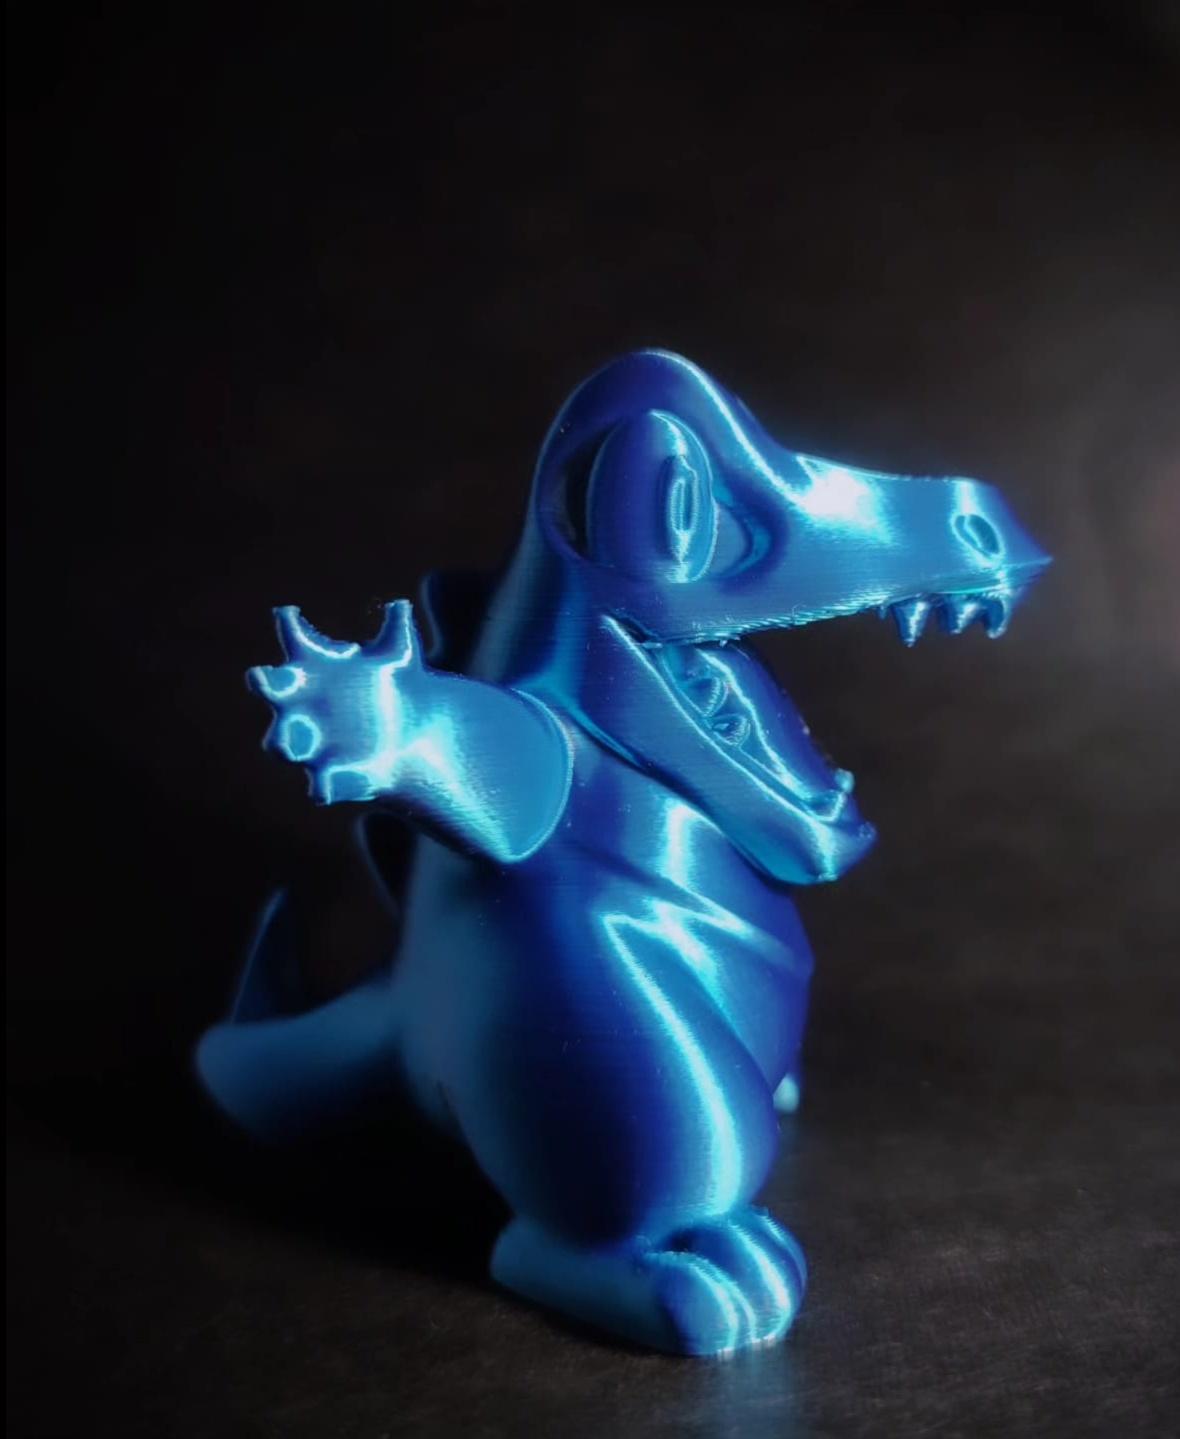 Totodile - Pokemon - Fan Art - Awesome model!

Check my insta page @3Doodling for more makes! ;) - 3d model